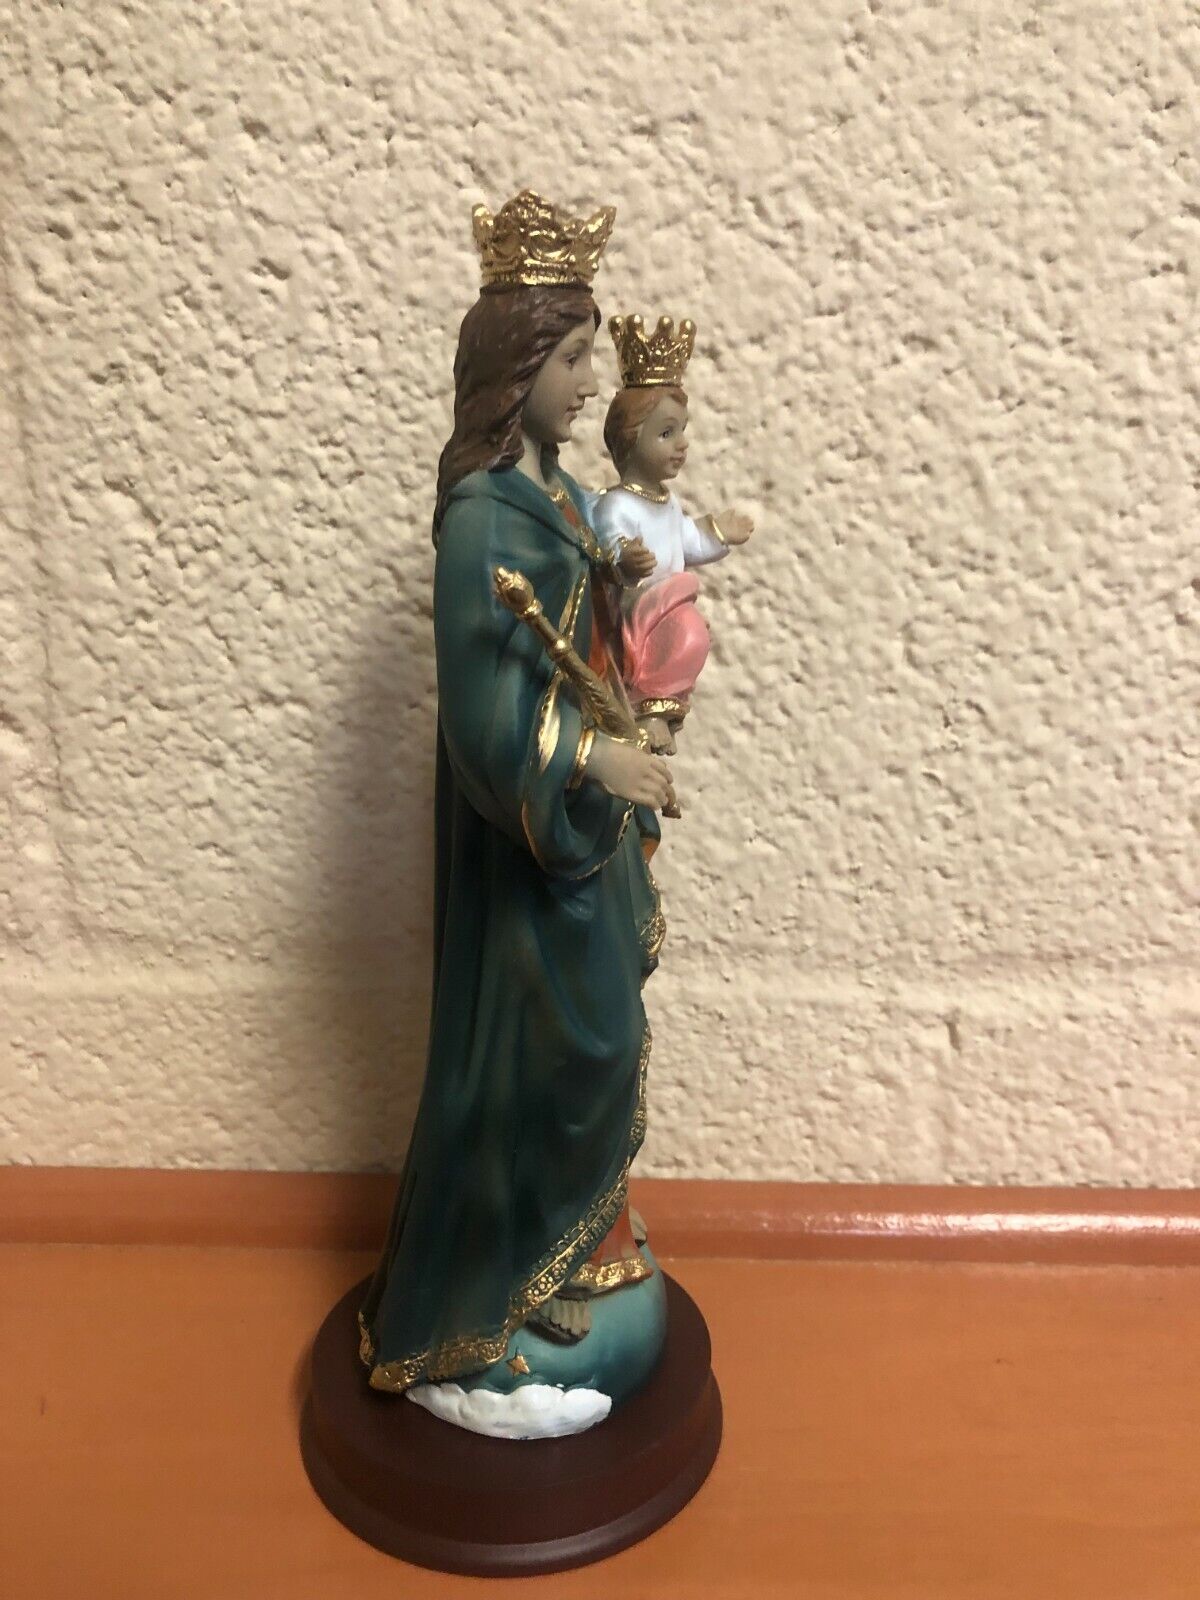 Blessed Mother Mary, Help of the Christians, 8.5" Statue, New